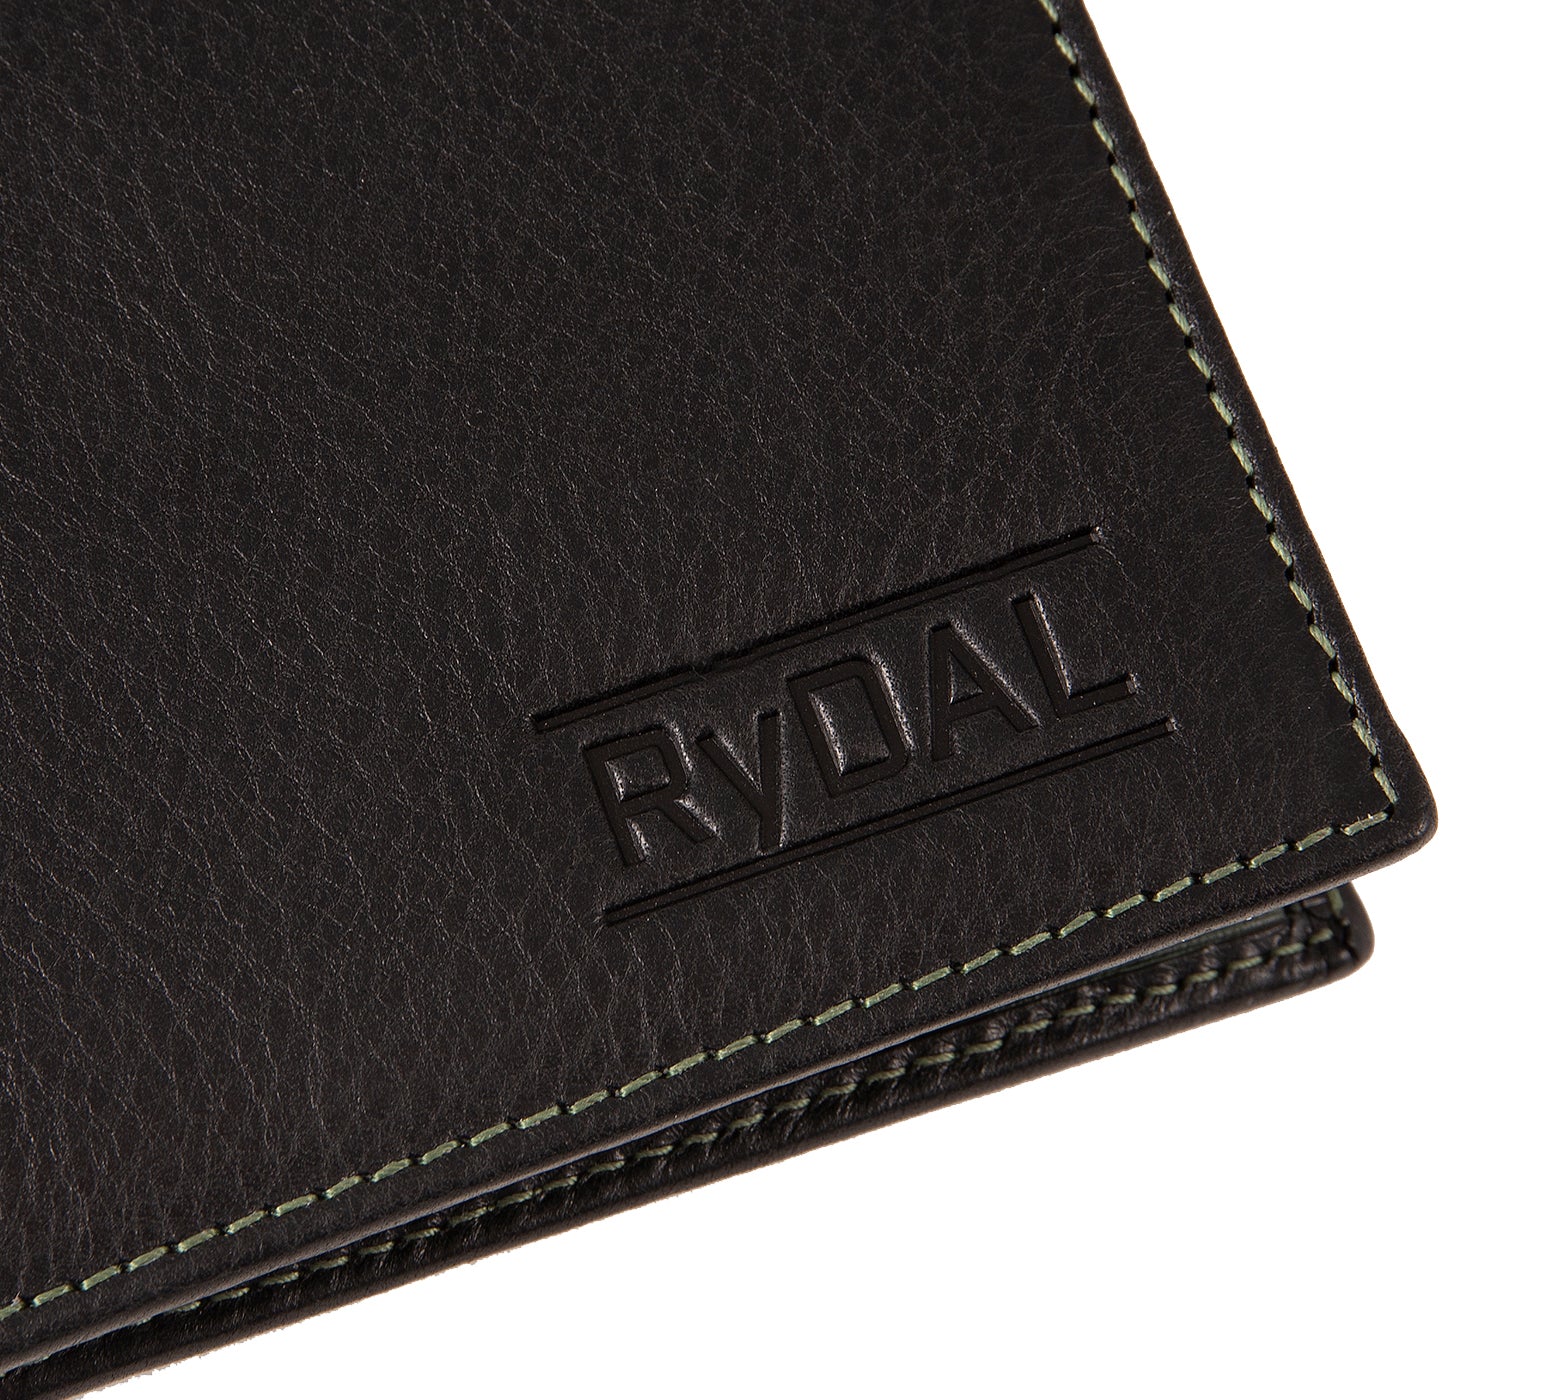 Mens Leather Wallet from Rydal in 'Black/Green' showing close up of logo.